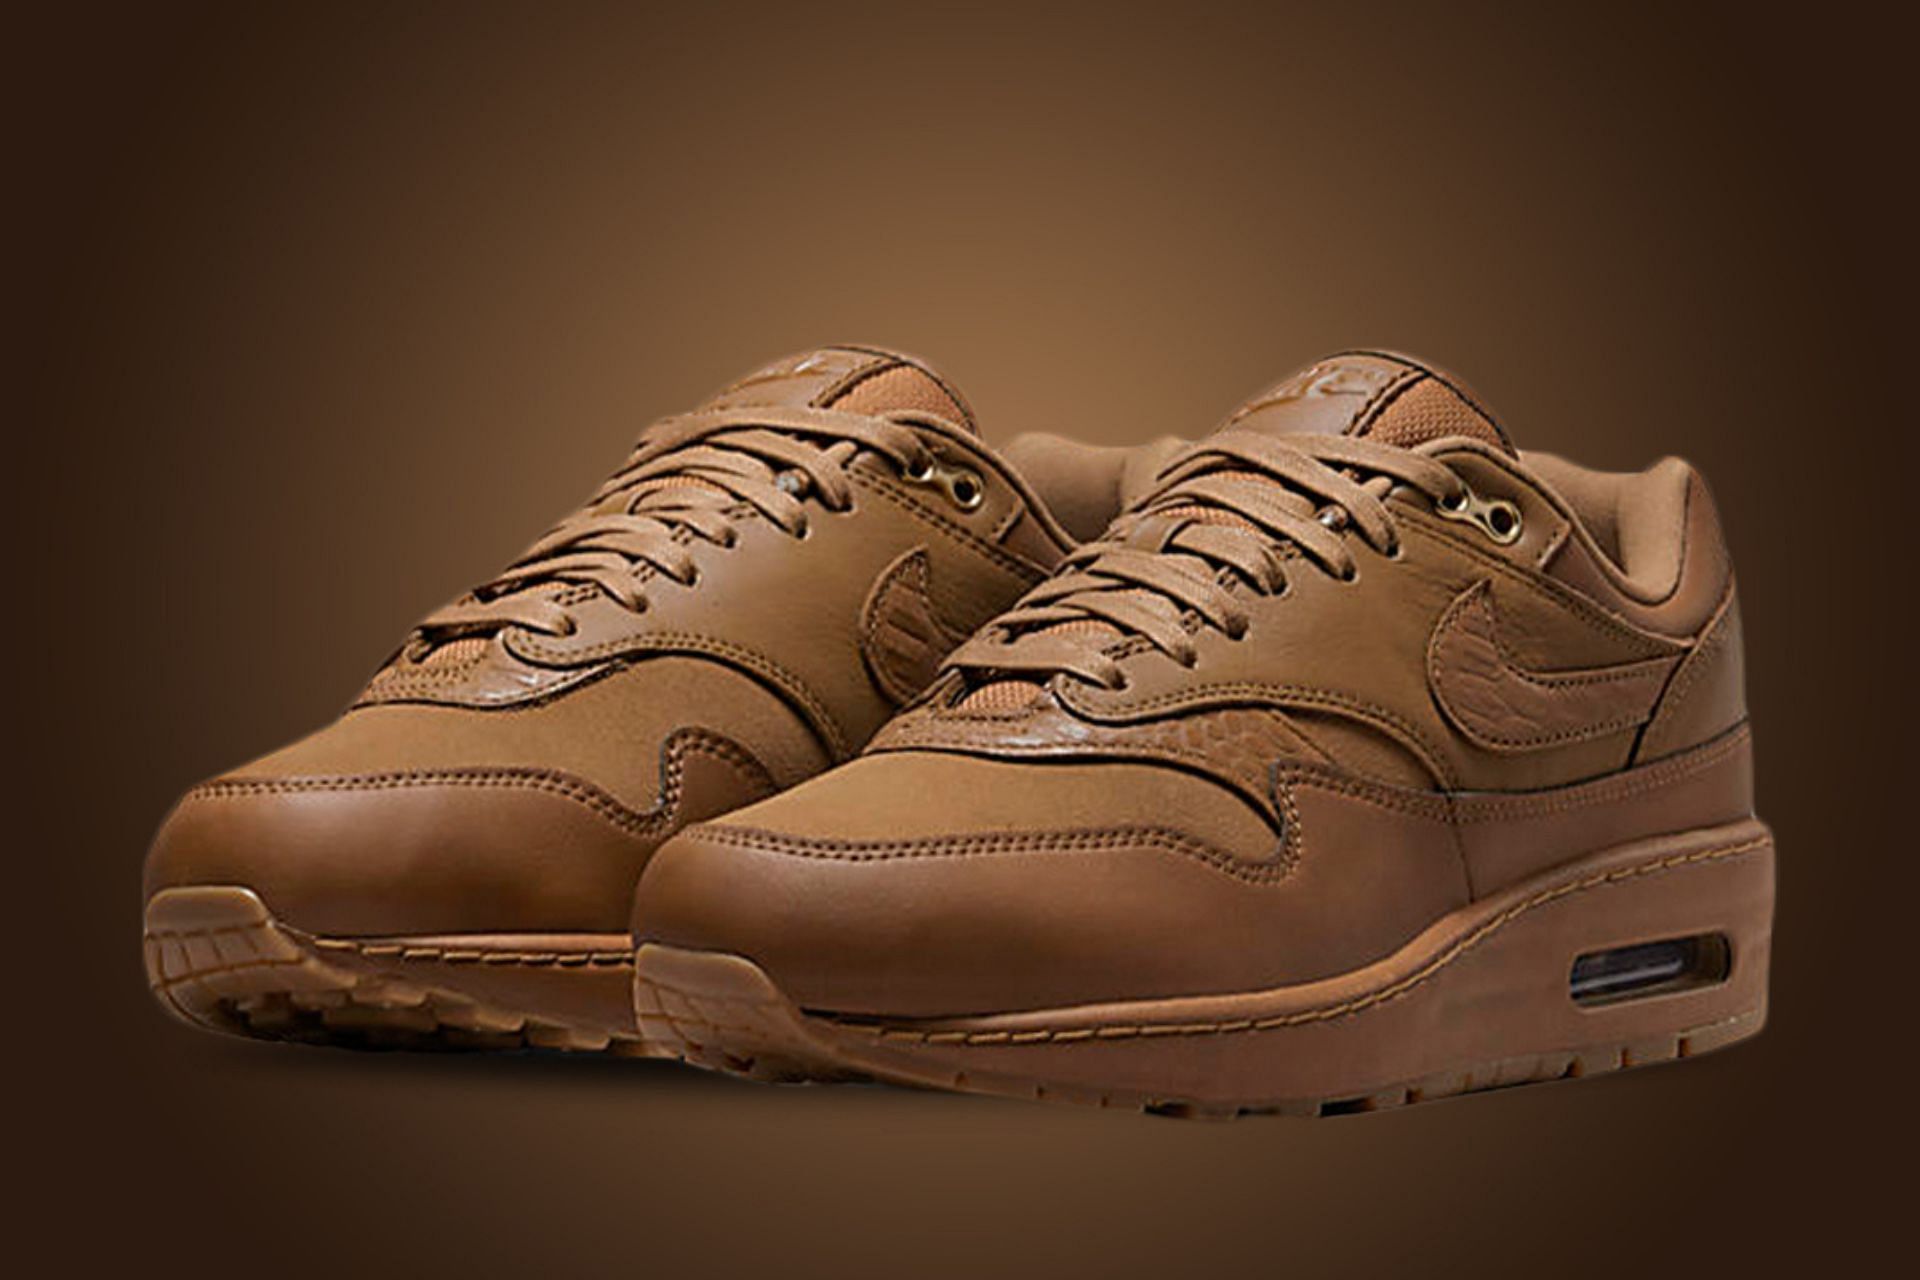 to buy Nike Air Ale Brown shoes? Price, release date, and more details